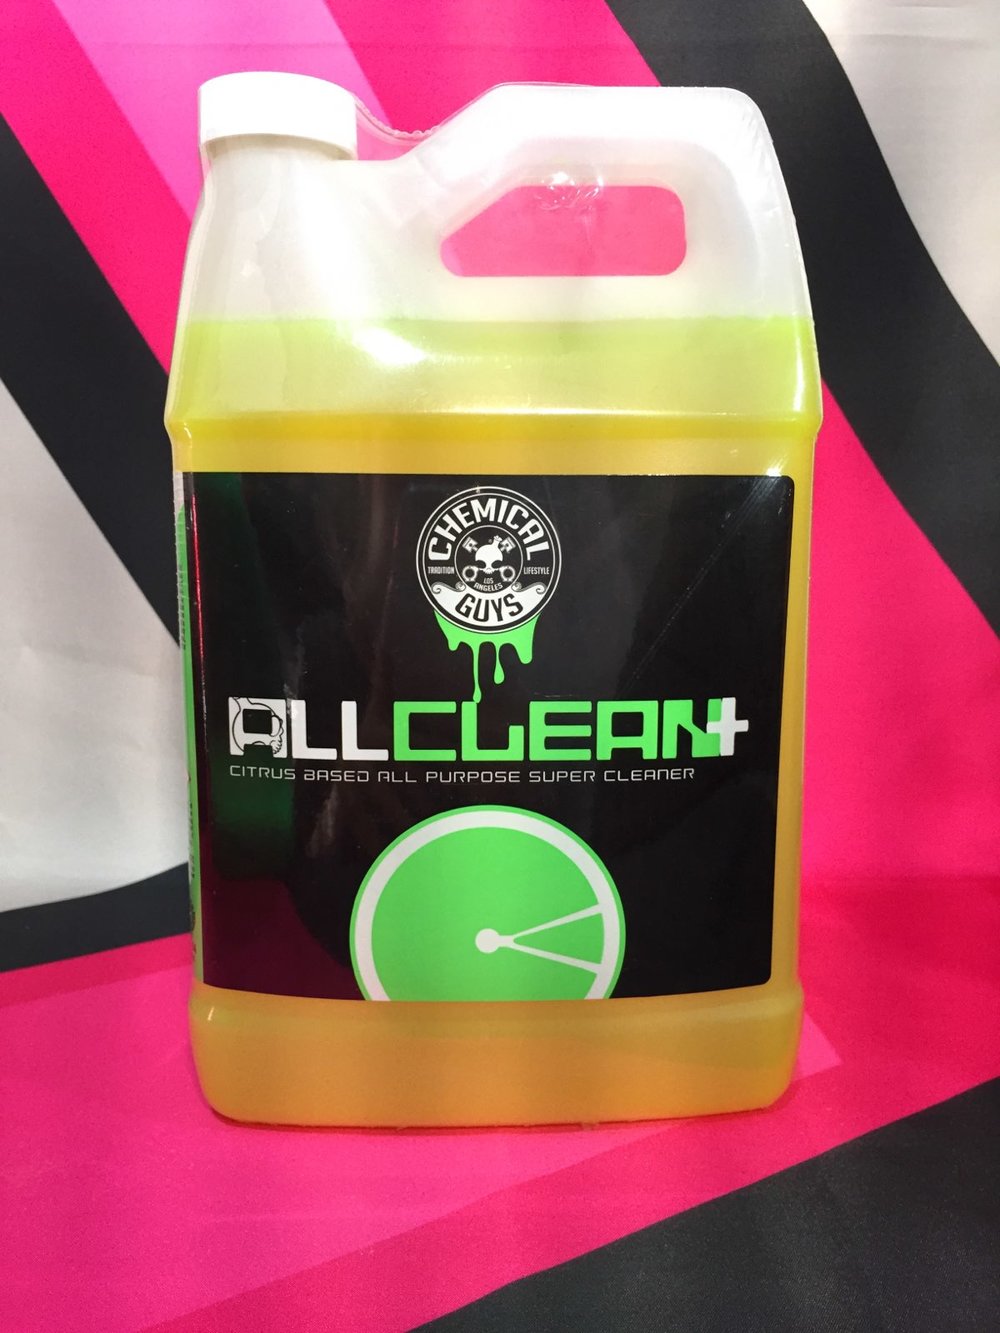 Chemical Guys | All Clean+ Citrus Base All Purpose Cleaner (1 Gallon)